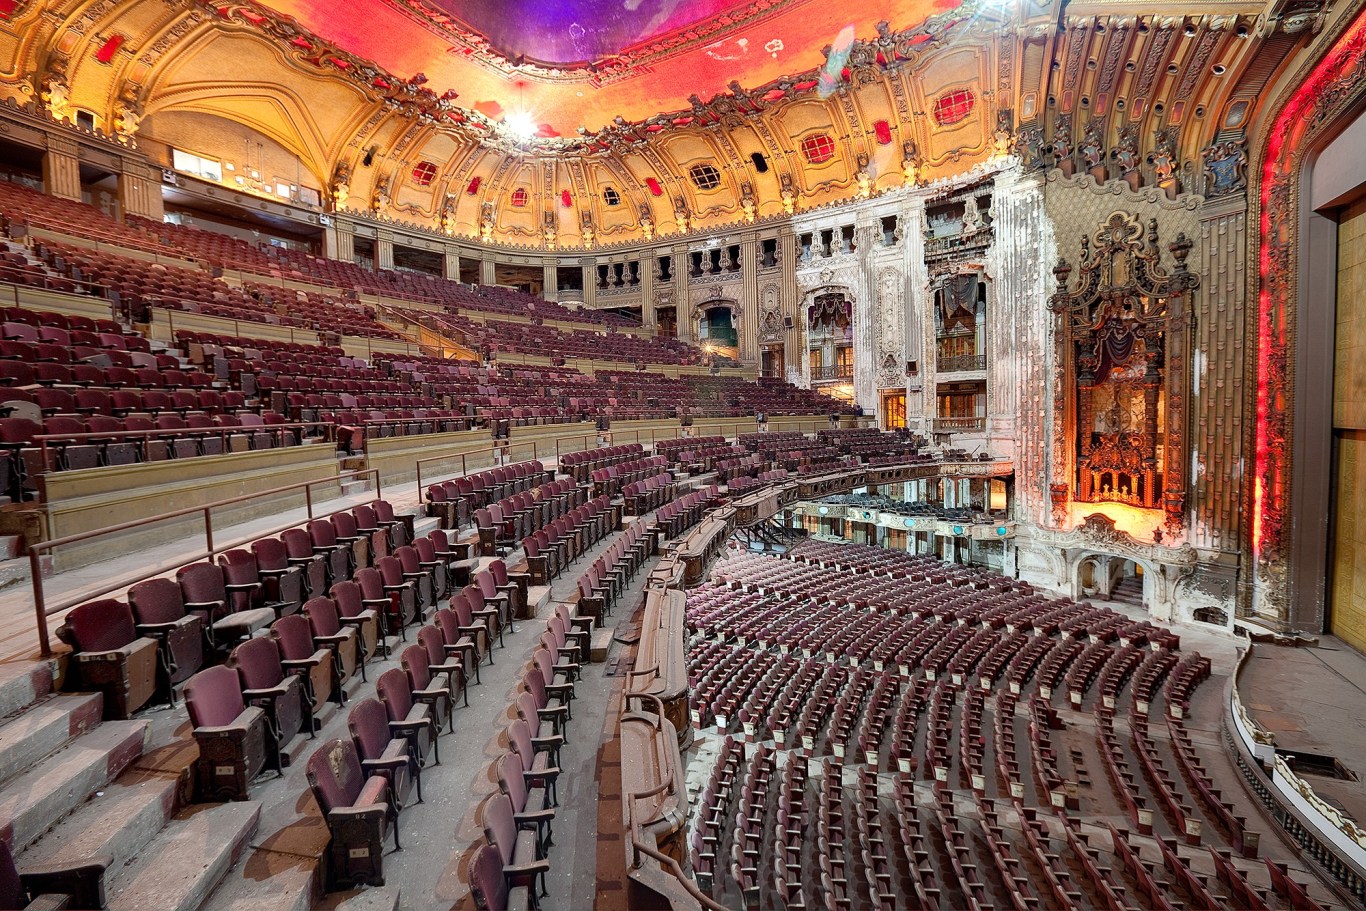 This multi-story venue shows the interior seating allowing for the large capacity of this venue. 